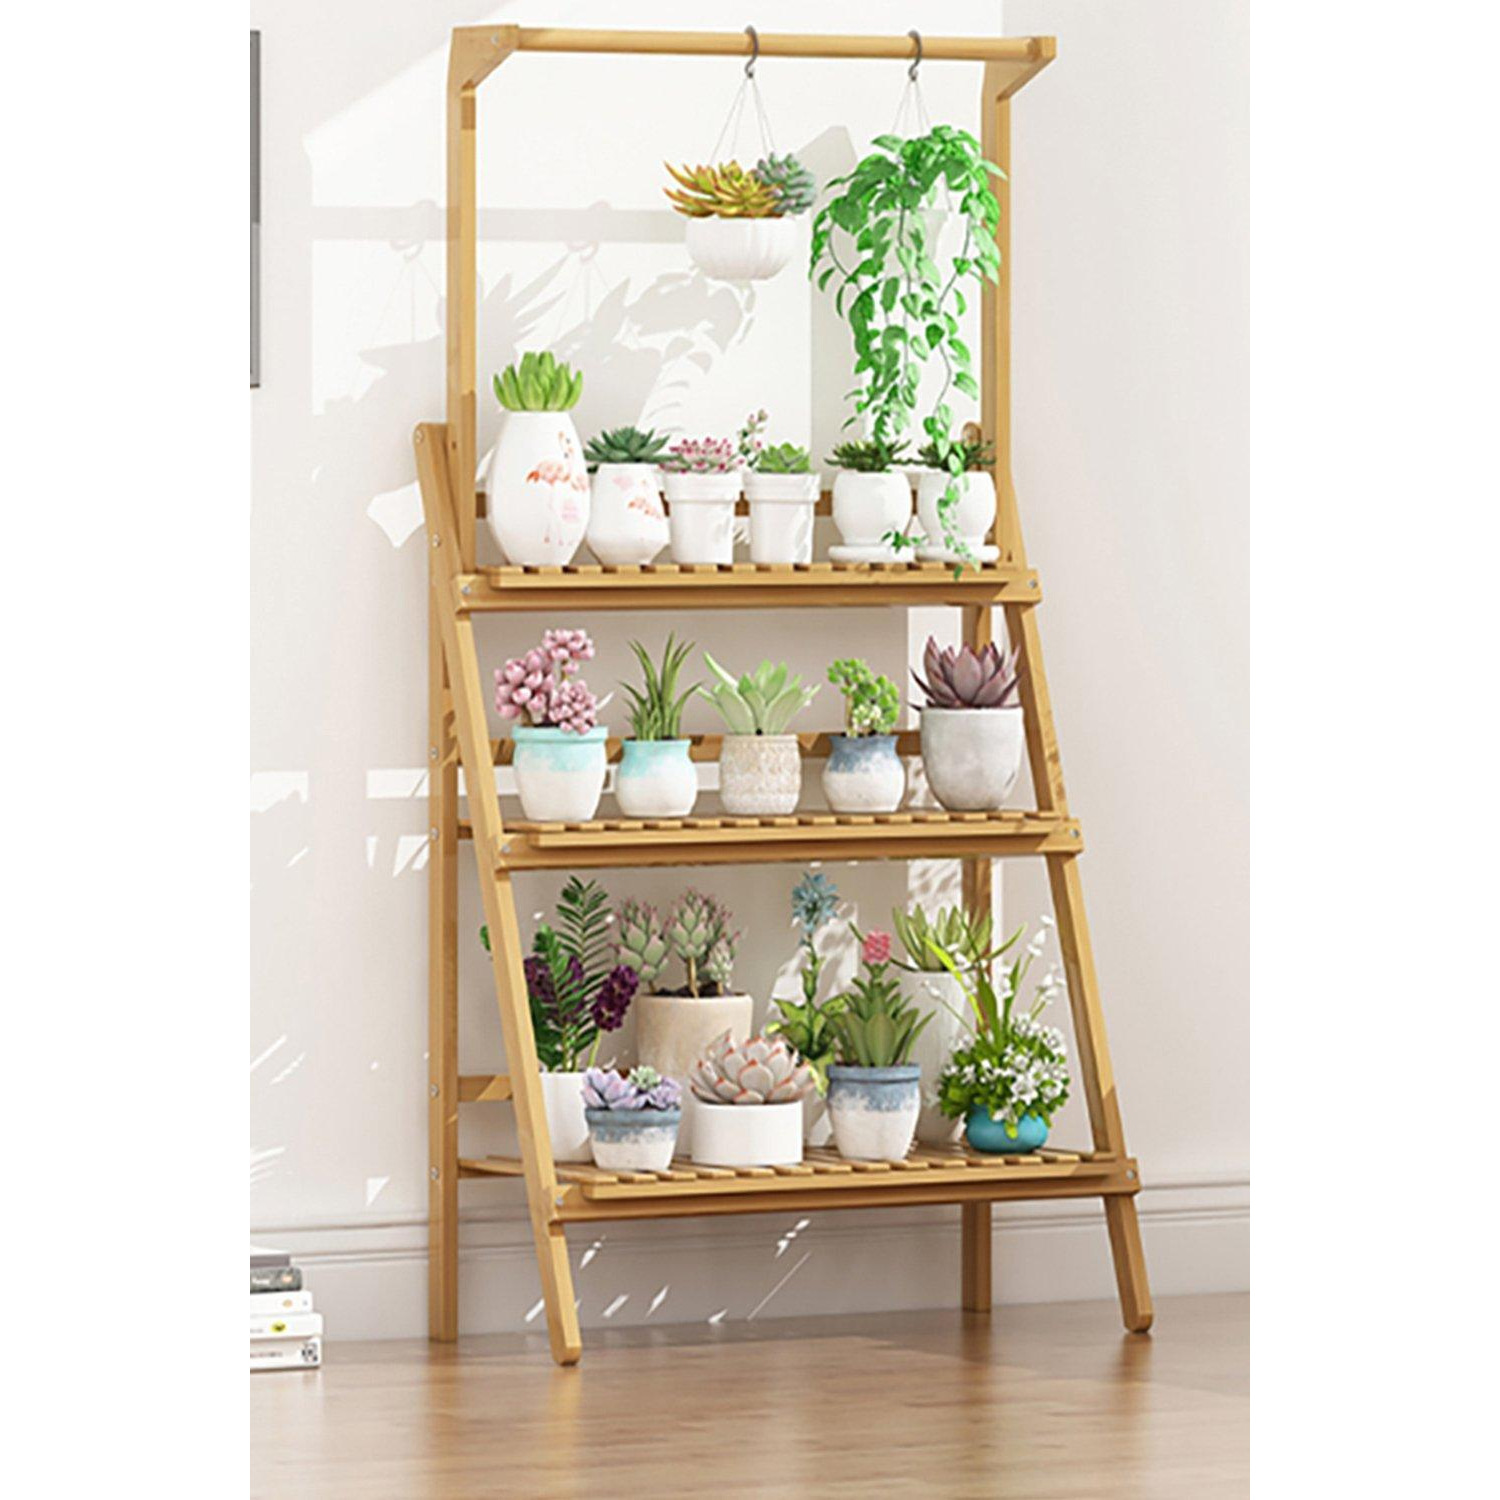 3-Tier Foldable Wooden Ladder Shelf with Hanging Rod - image 1